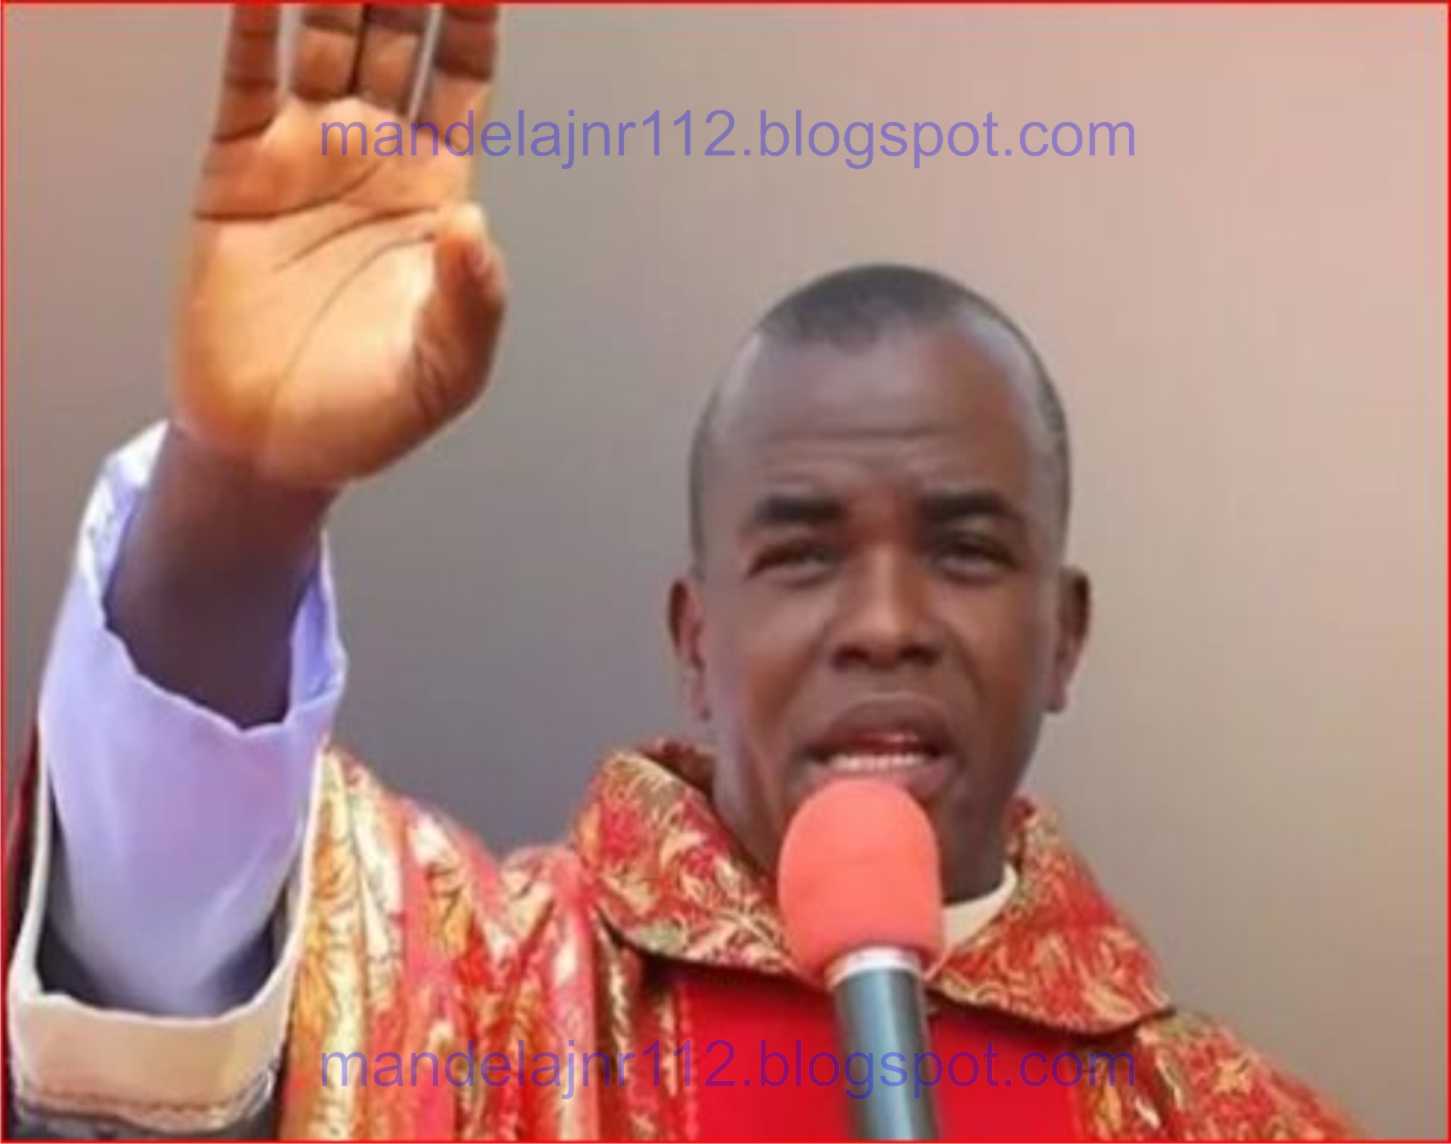 New Trouble for Fr Mbaka as Catholic Church Ban Members from Attending His Adoration Ministry